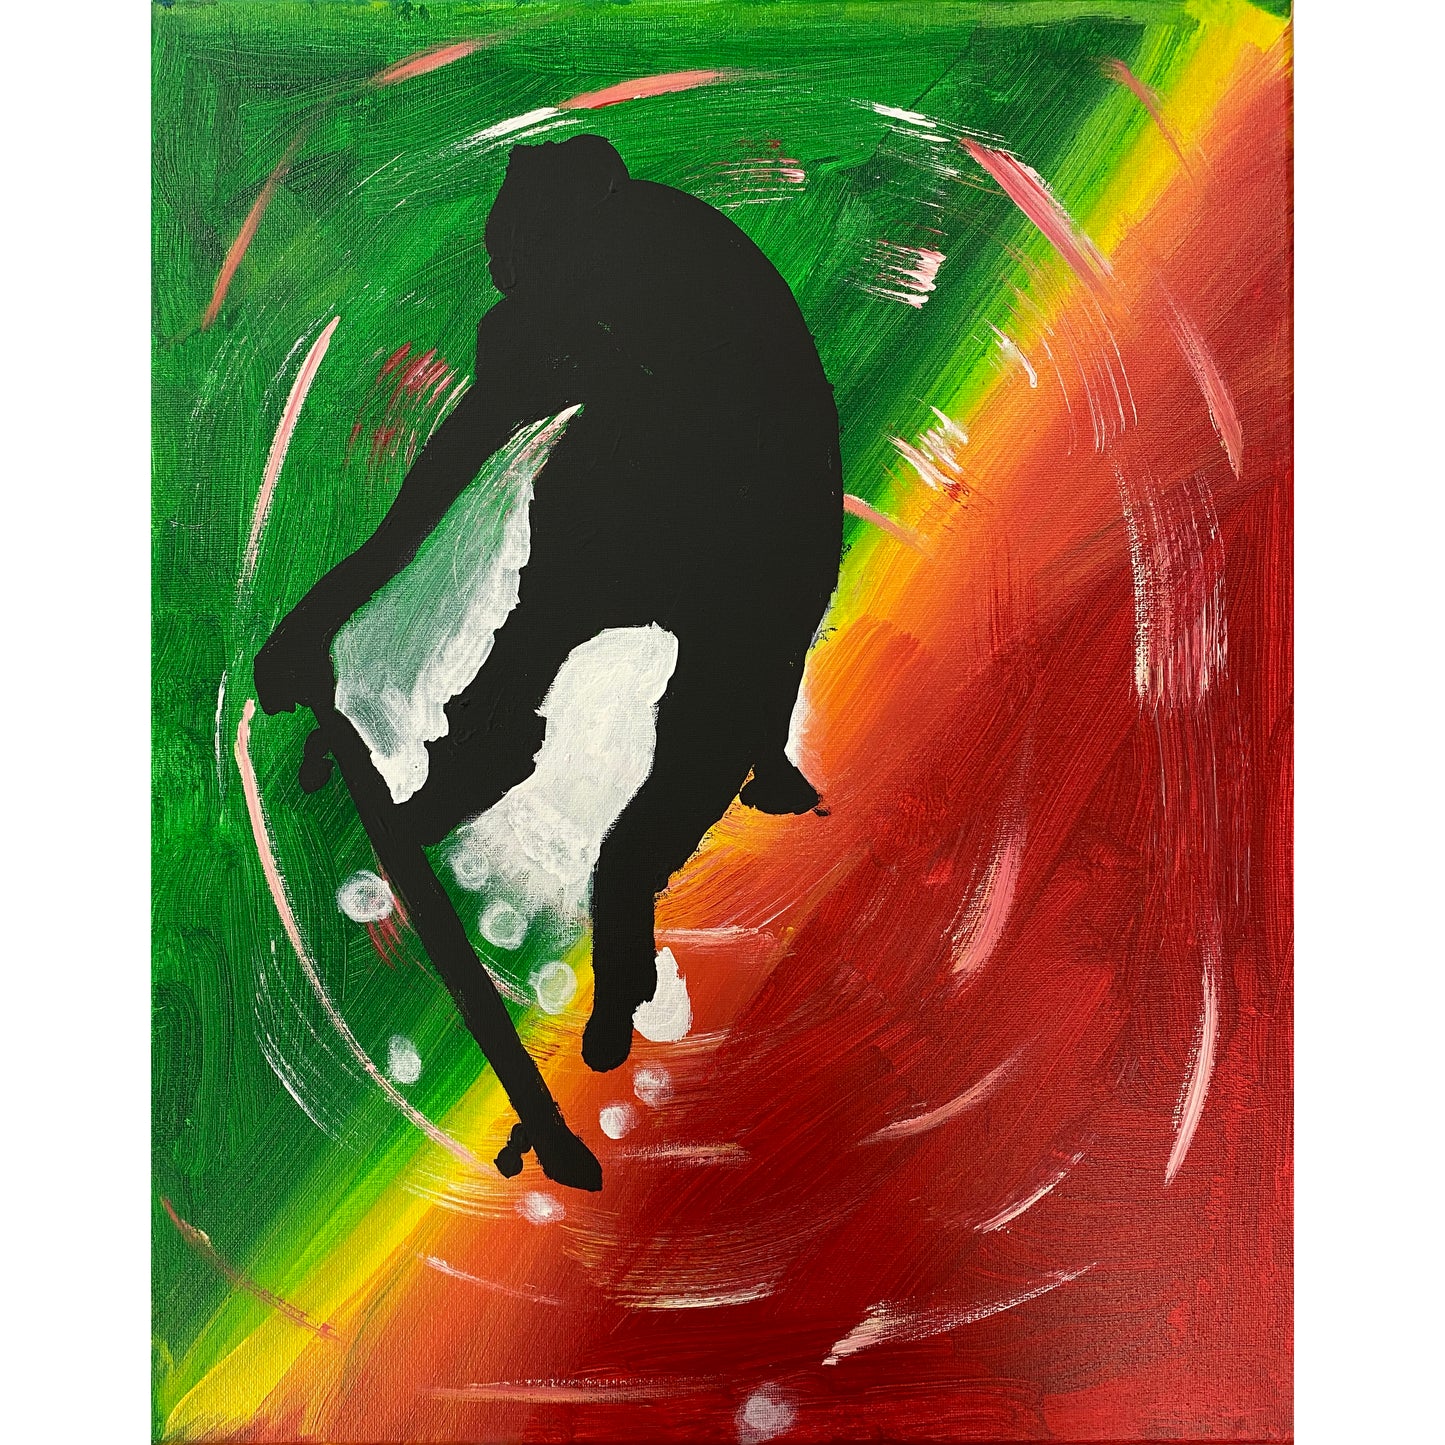 Acrylic Paint on Stretched Canvas, 20 x 16 Original Fine Art, Skater made by Annika Kohler-Crowe